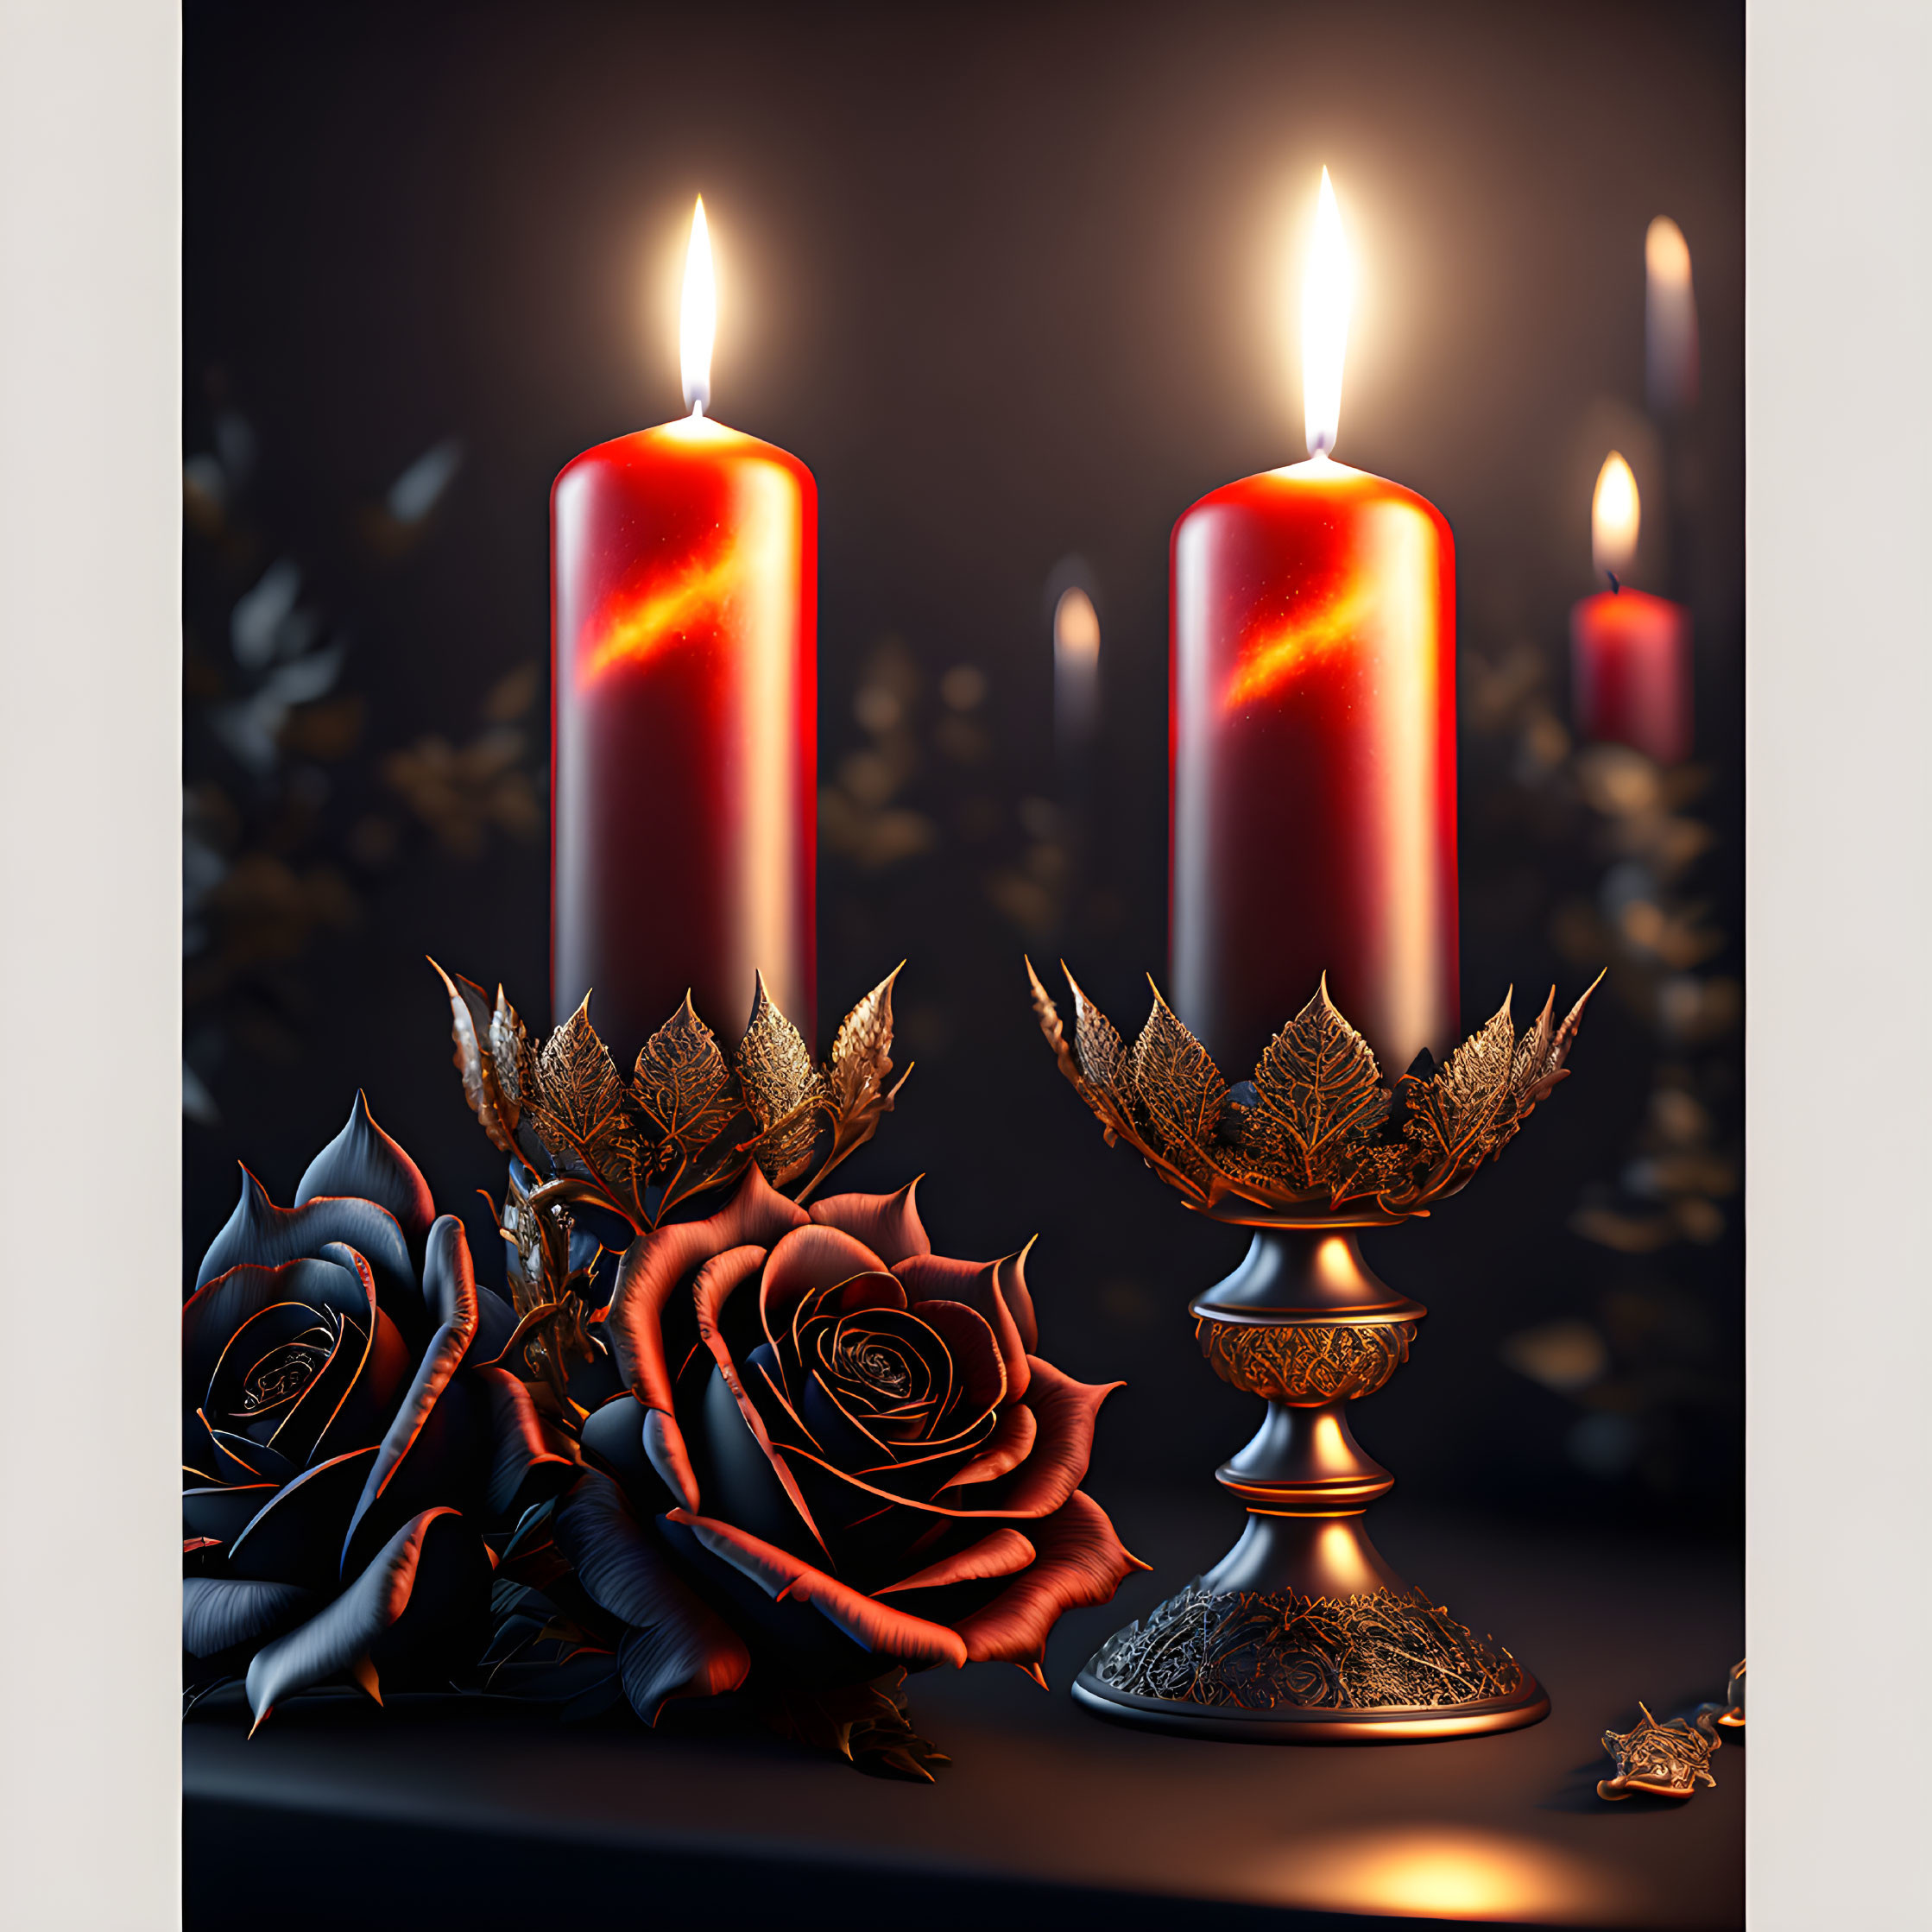 Three lit red candles on ornate stands among dark roses and metallic leaves, reflecting on a shadowy